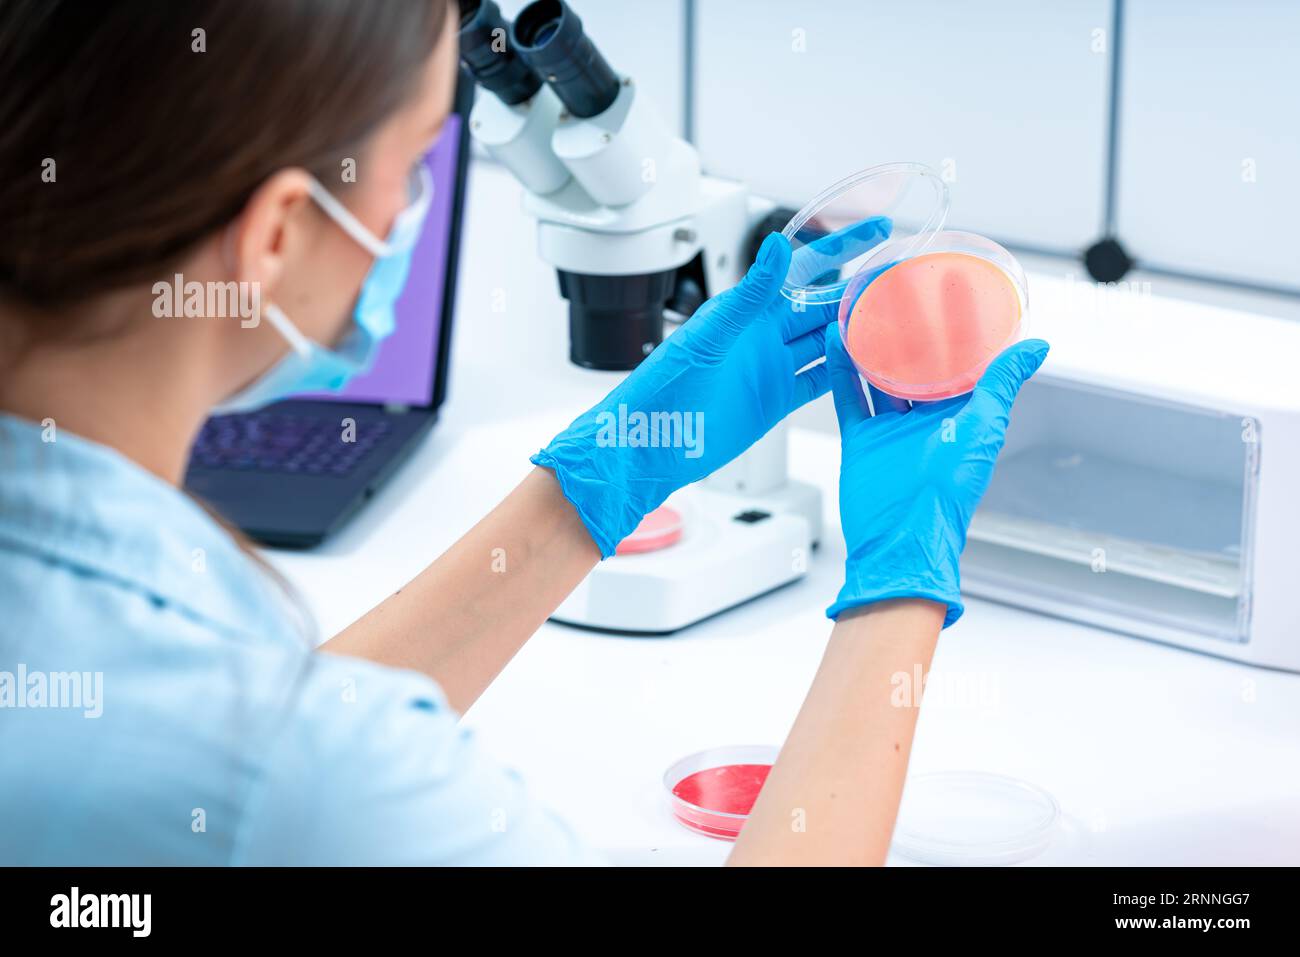 Epidemiological surveillance: Petri dishes are used in epidemiological surveillance to collect and analyze samples from suspected disease outbreaks Th Stock Photo